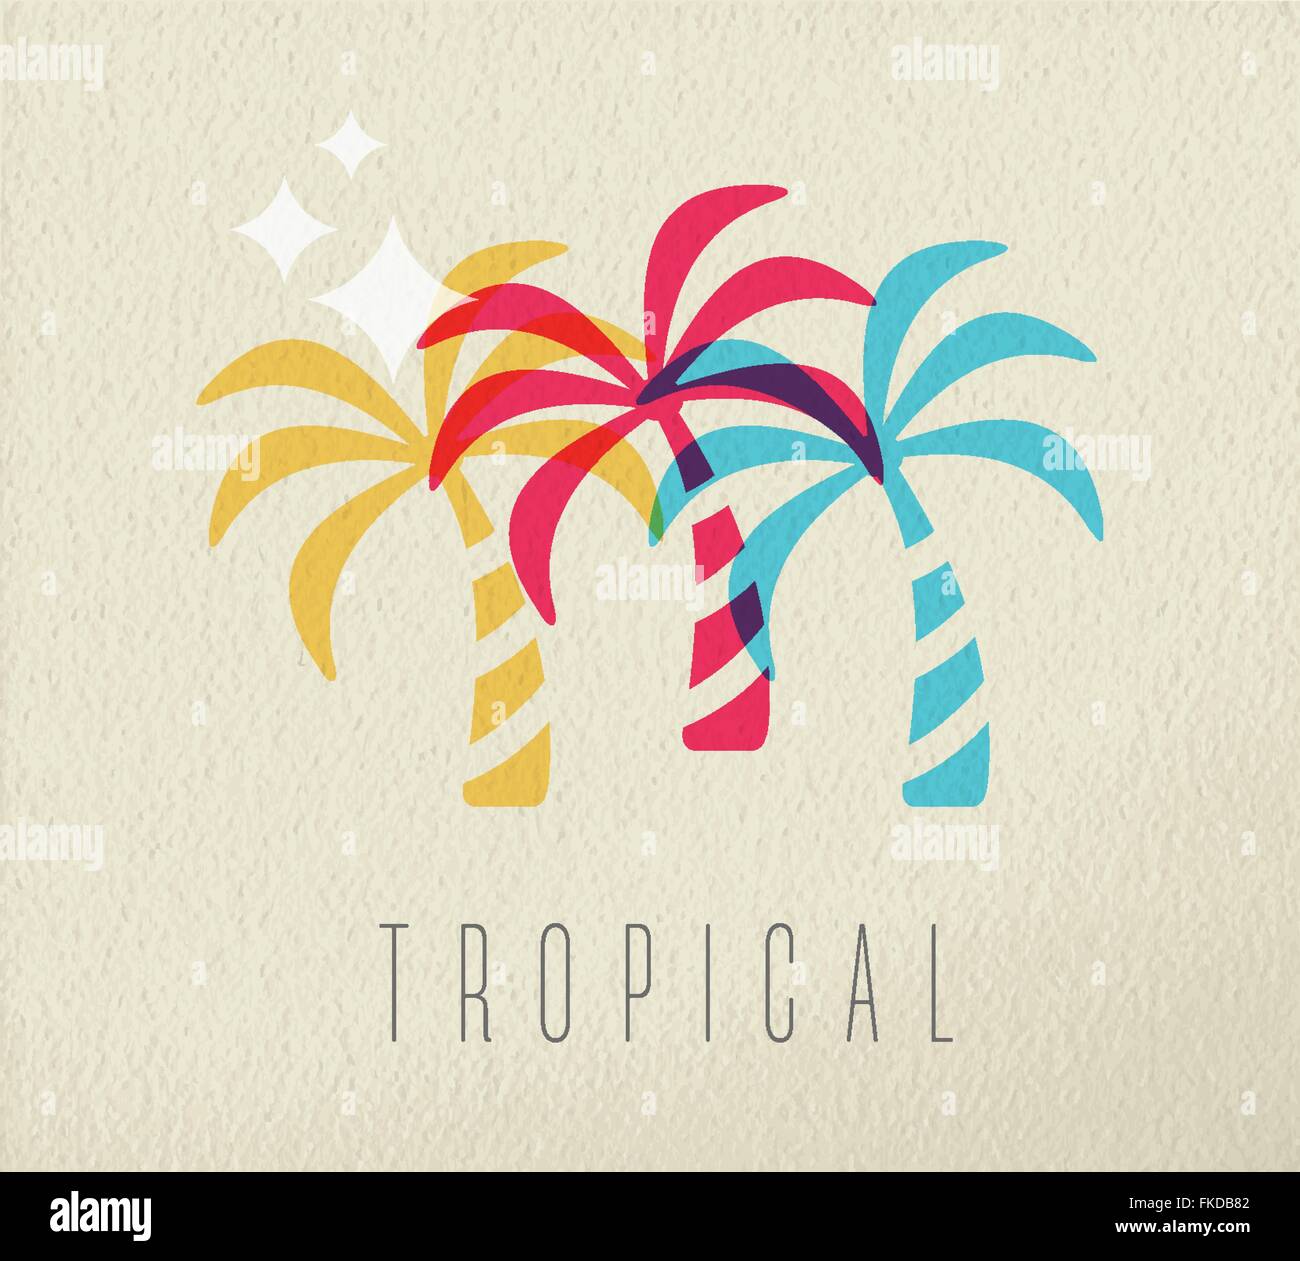 Tropical beach vacation concept illustration with colorful summer palm tree on texture background. EPS10 vector. Stock Vector